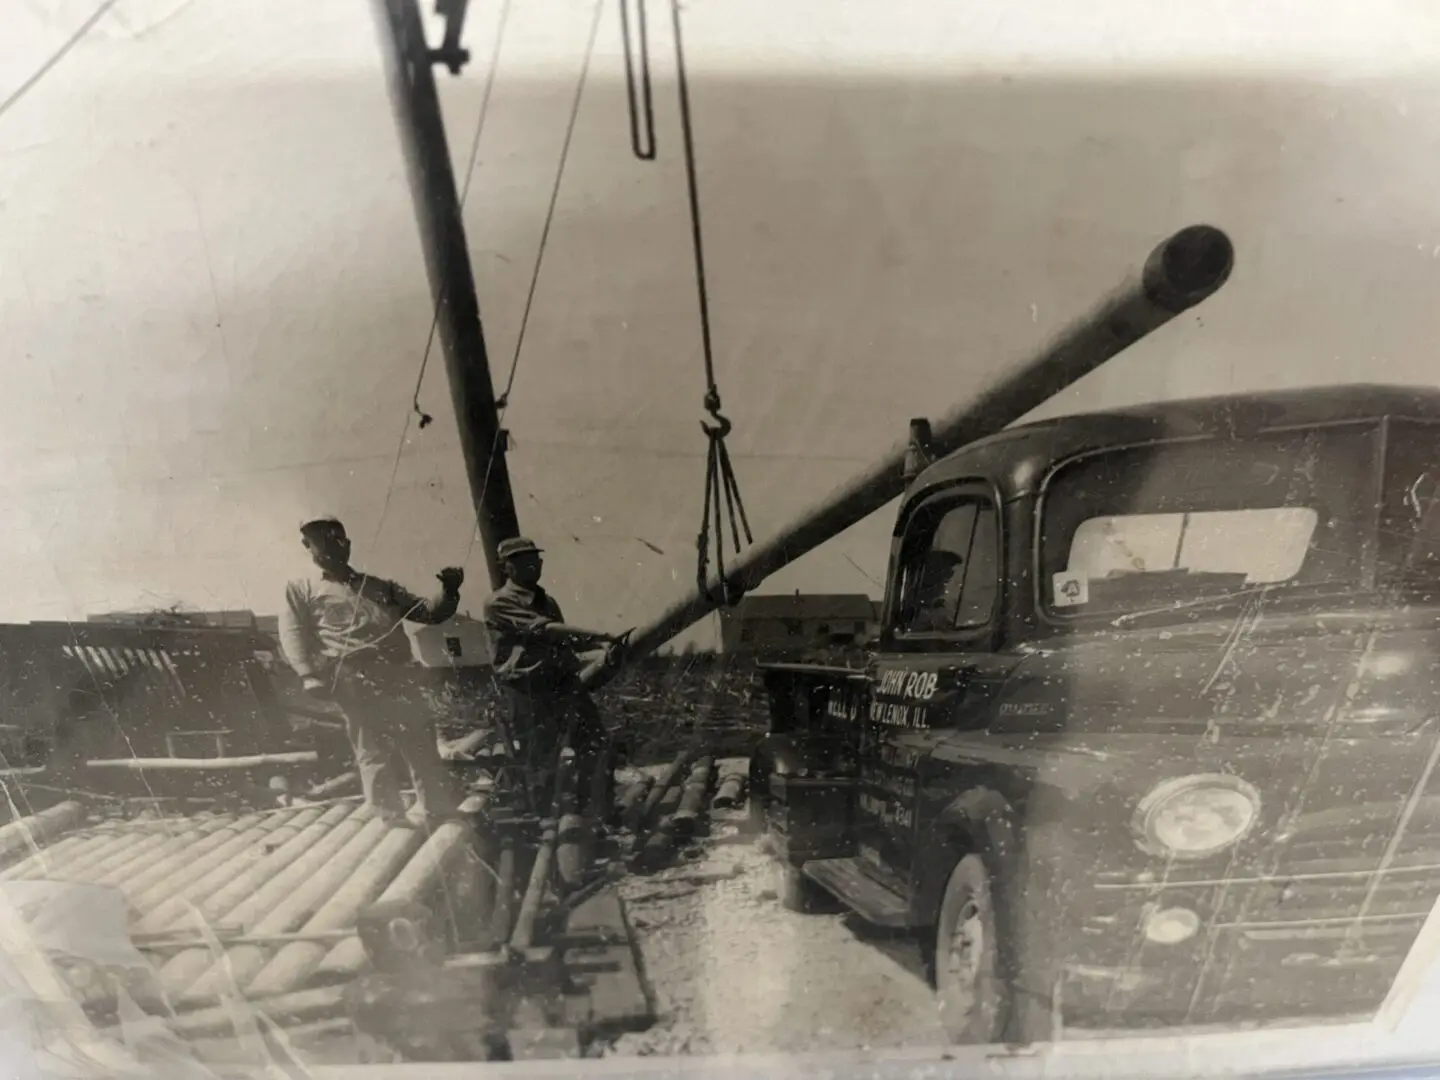 An old photo of two men with a large pipe and a vintage car